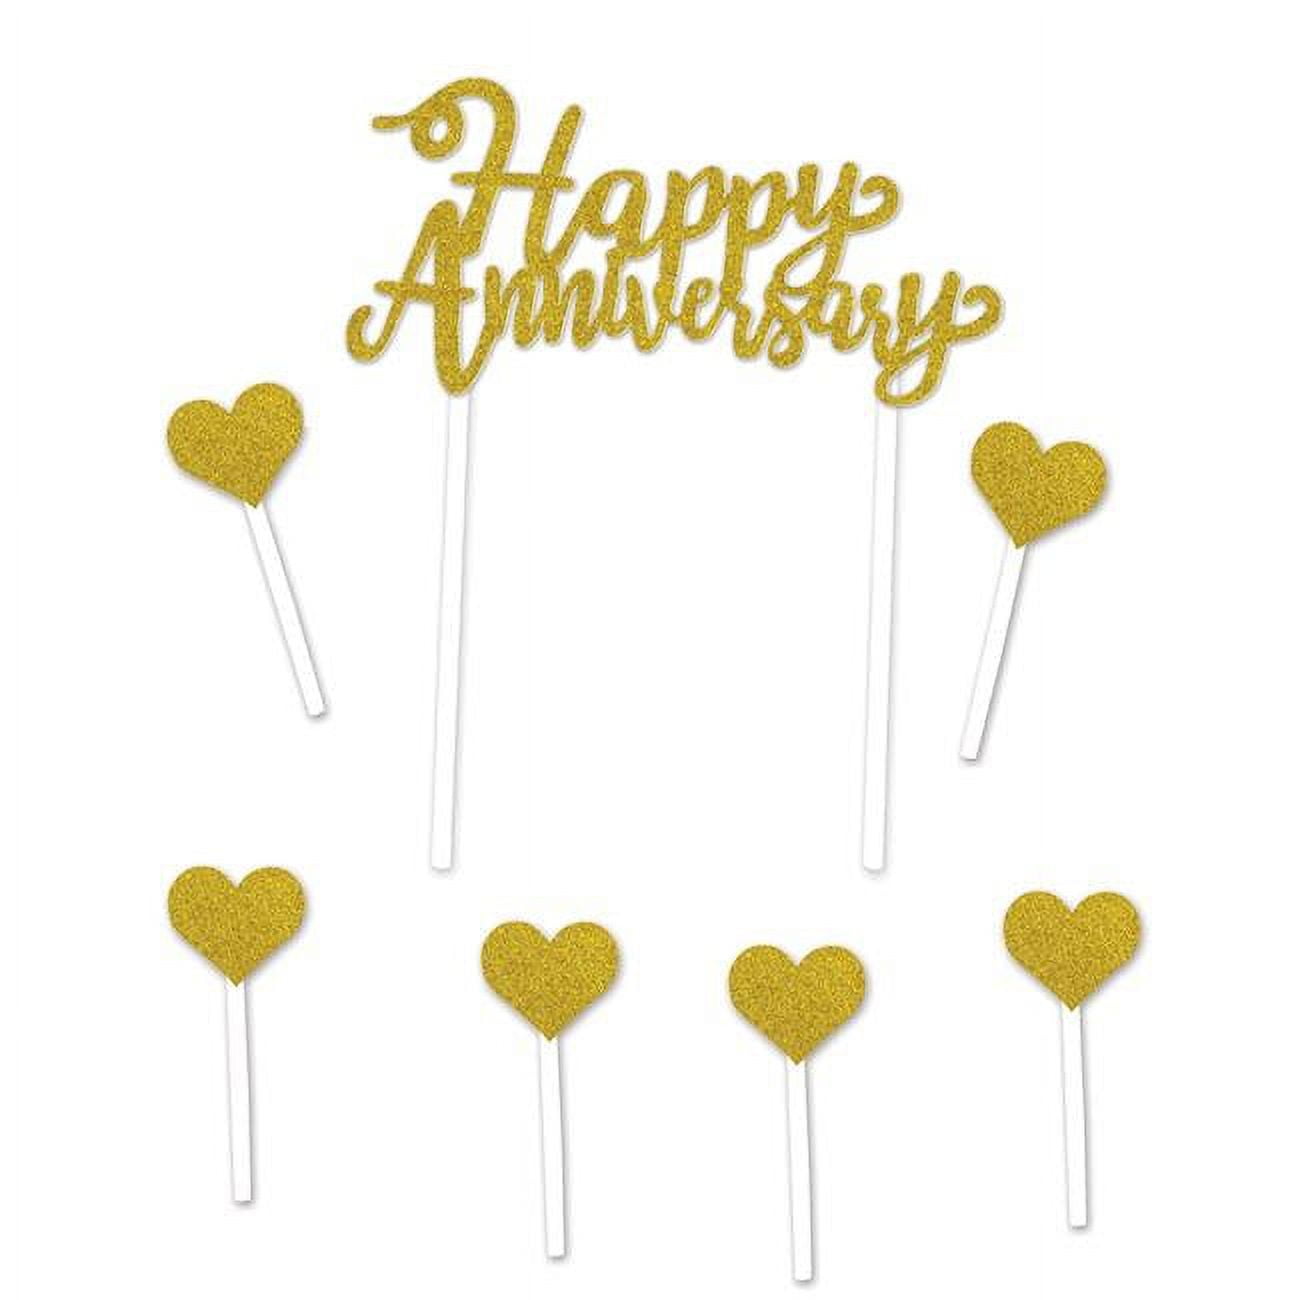 Picture of Beistle 53535-GD 6 x 8 in. Happy Anniversary Cake Topper, Gold - Pack of 12